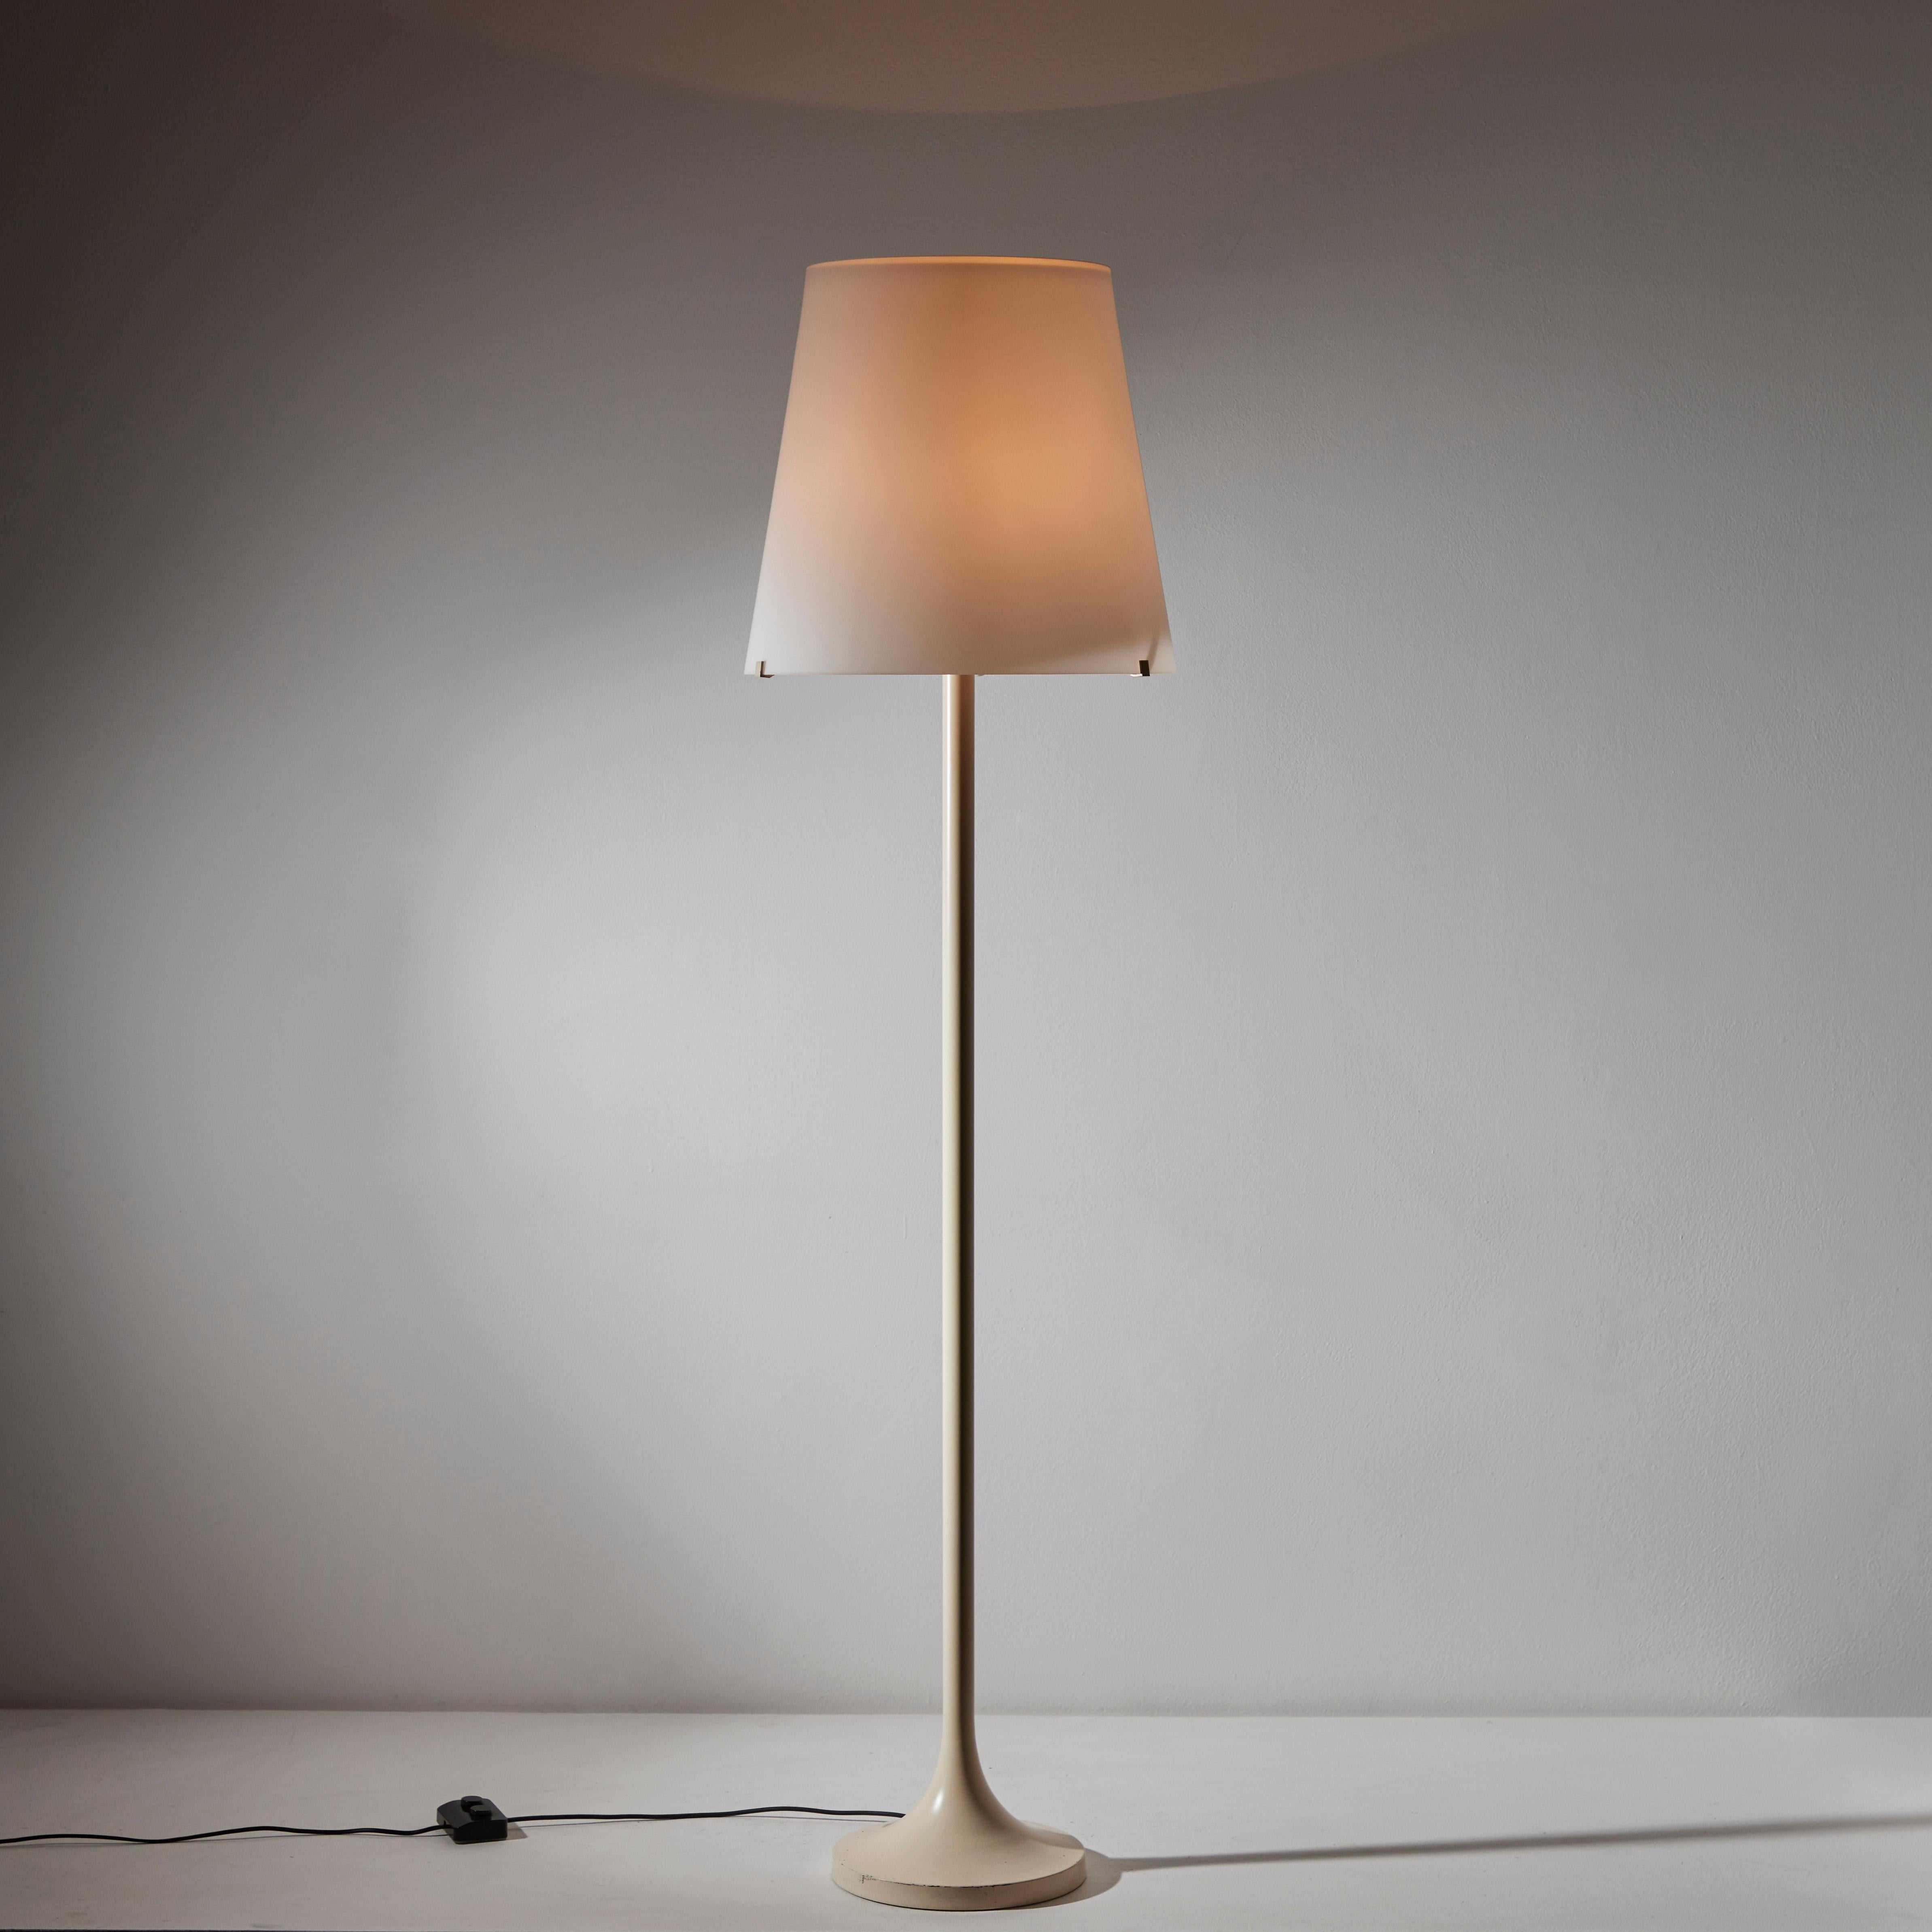 Floor lamp by Max Ingrand for Fontana Arte. Designed and manufactured in Italy, circa 1960's. Glass, metal, original EU cord. Lamping: 120v Upper shade 1 Qty E27 Socket 60w G25 Frosted Bulb. Lower Shade 4Qty E27 Sockets 40w Frosted Bulb. Lightbulbs